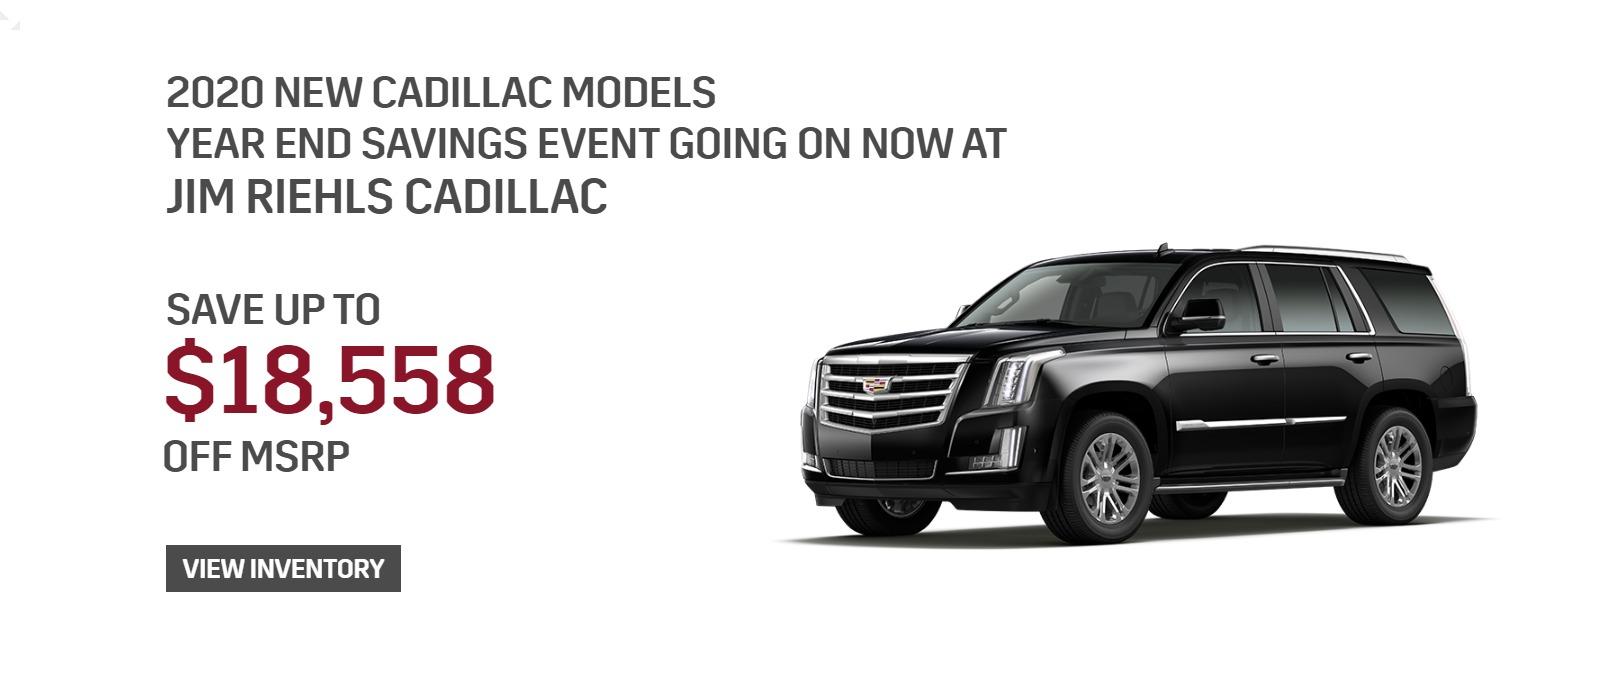 2020 NEW CADILLAC MODELS YEAR END SAVINGS EVENT GOING ON NOW AT JIM RIEHLS CADILLAC.  SAVE UP TO $18,558 OFF MSRP